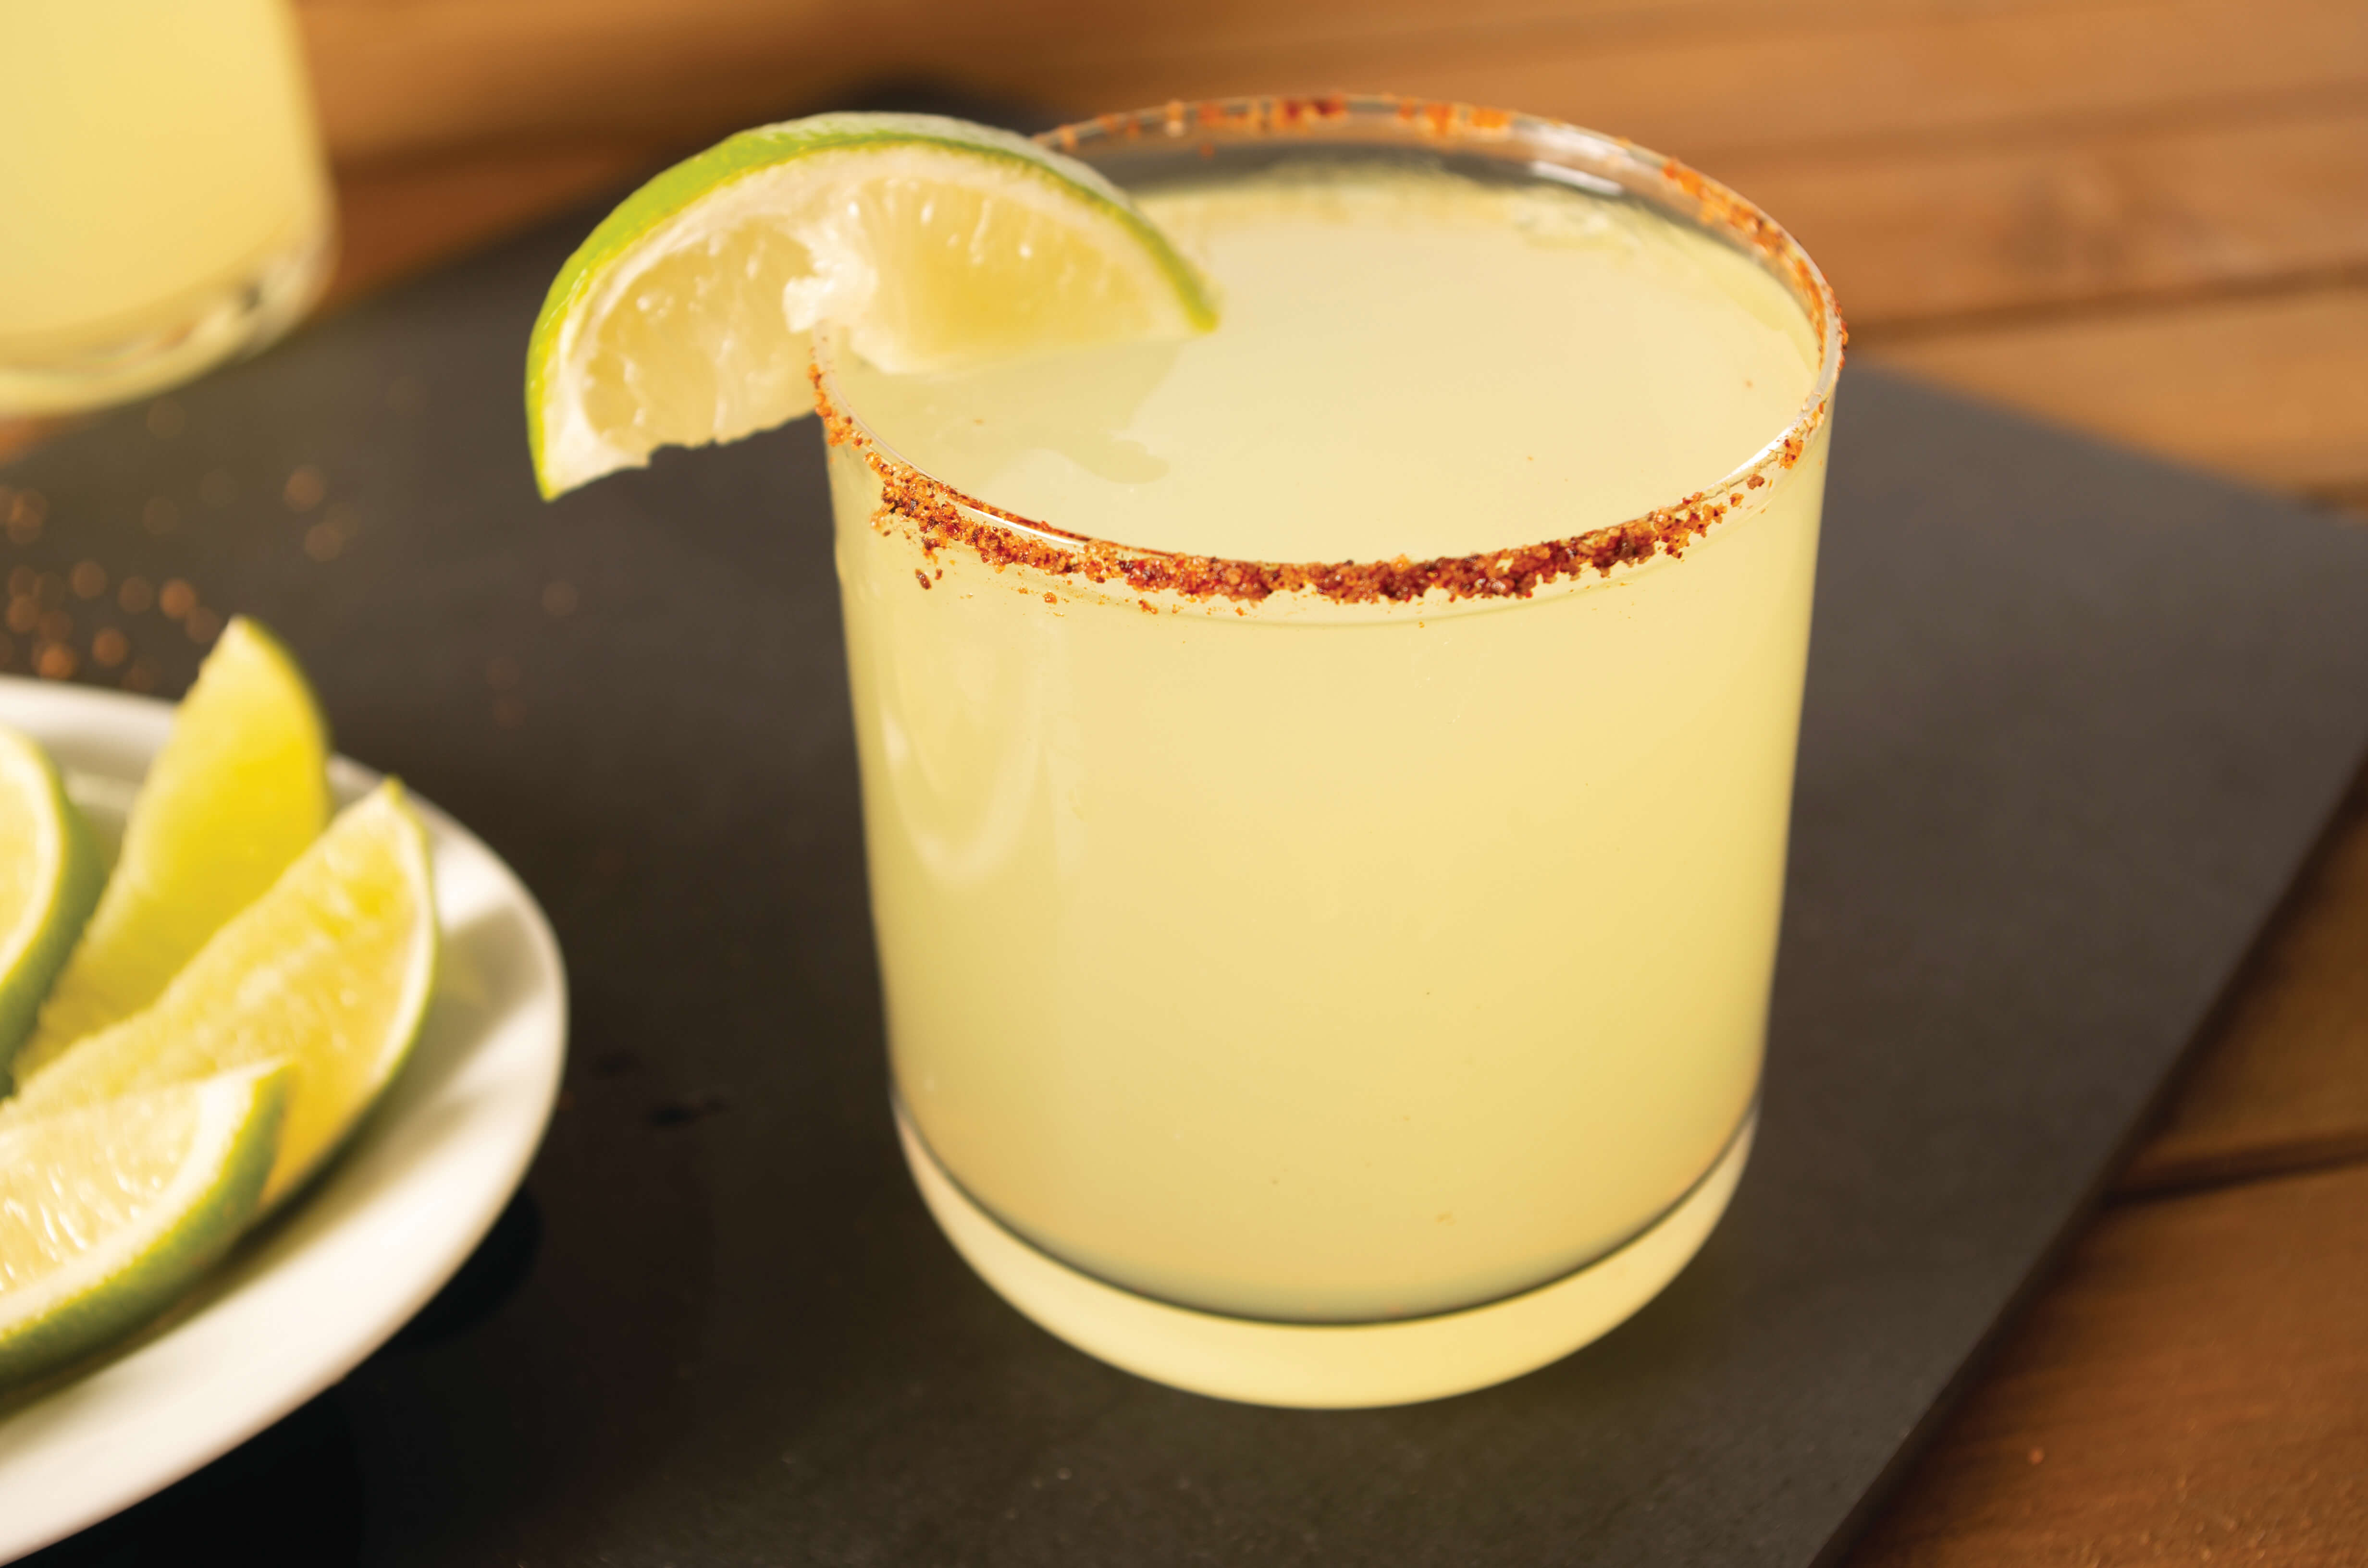 Fuchs North America introduces Charred: The Smoke & Fire Collection.  Pictured is a delicious recipe featuring Fuchs’ Charred Chili Margarita Salt from the new collection.